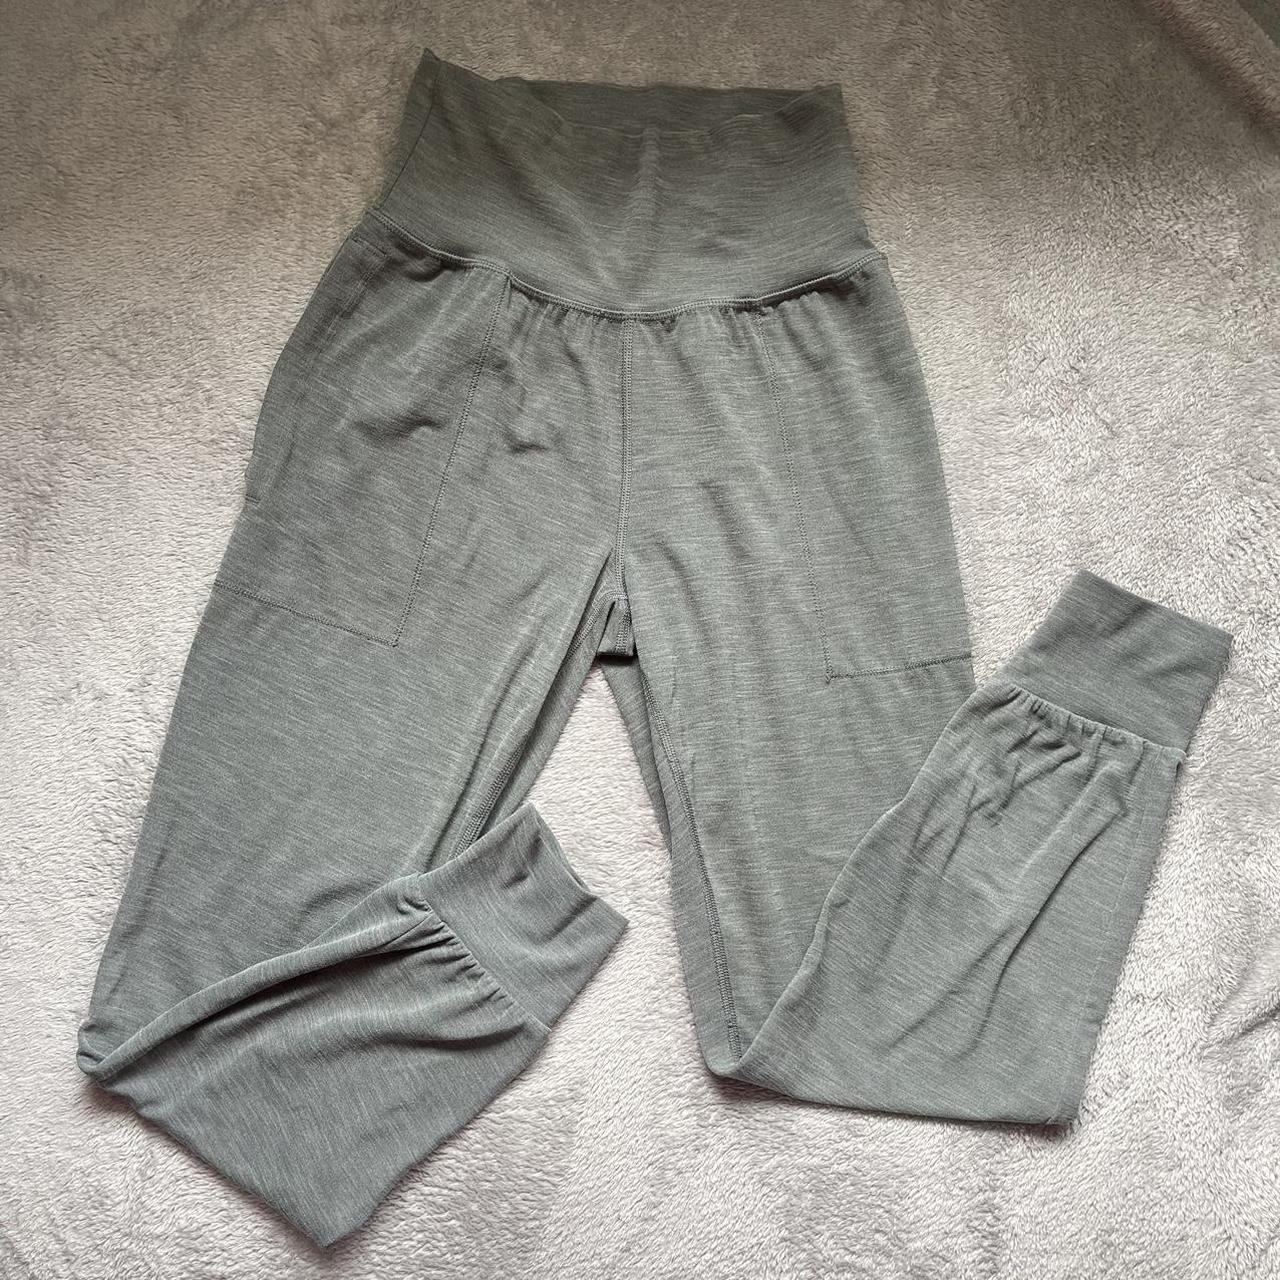 Athleta Salutation Jogger - new with tags, dusty - Depop